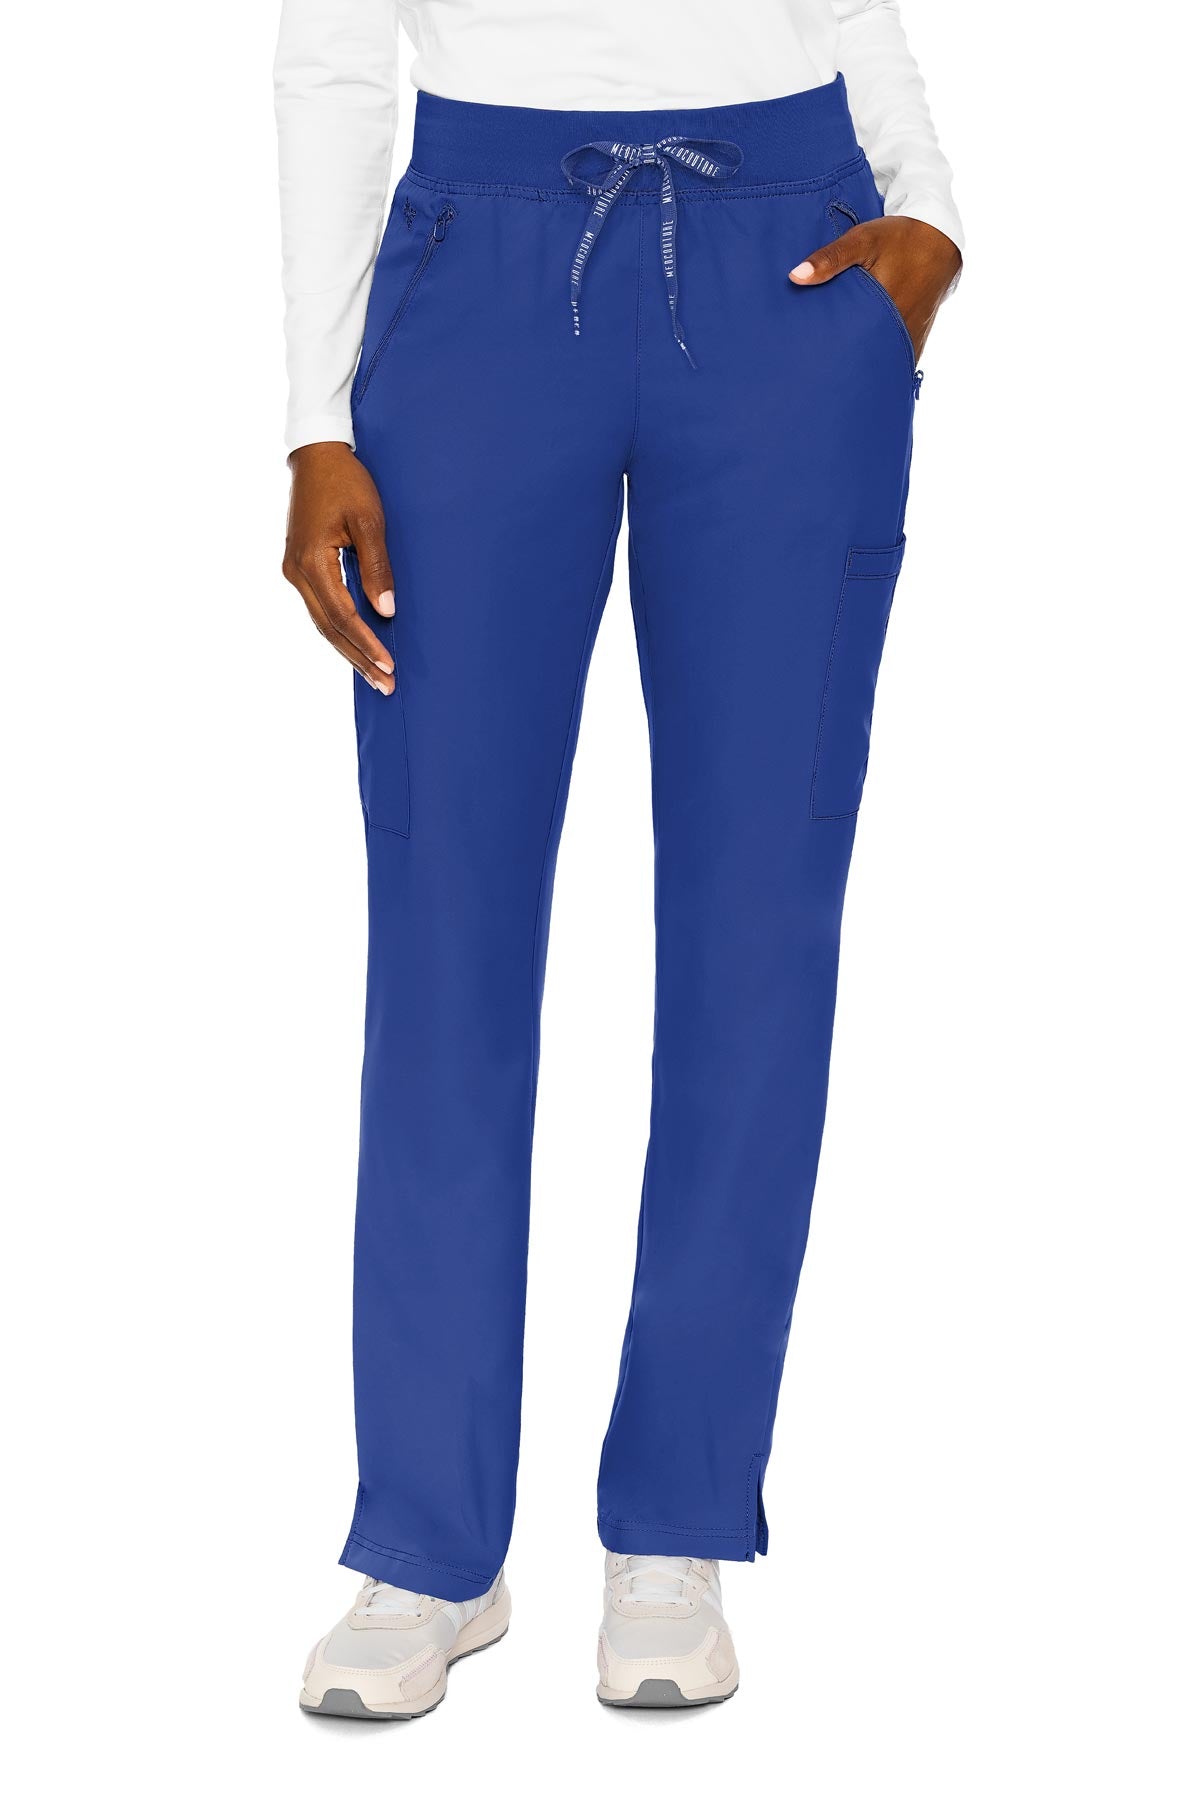 MED COUTURE Zipper Pant Tall